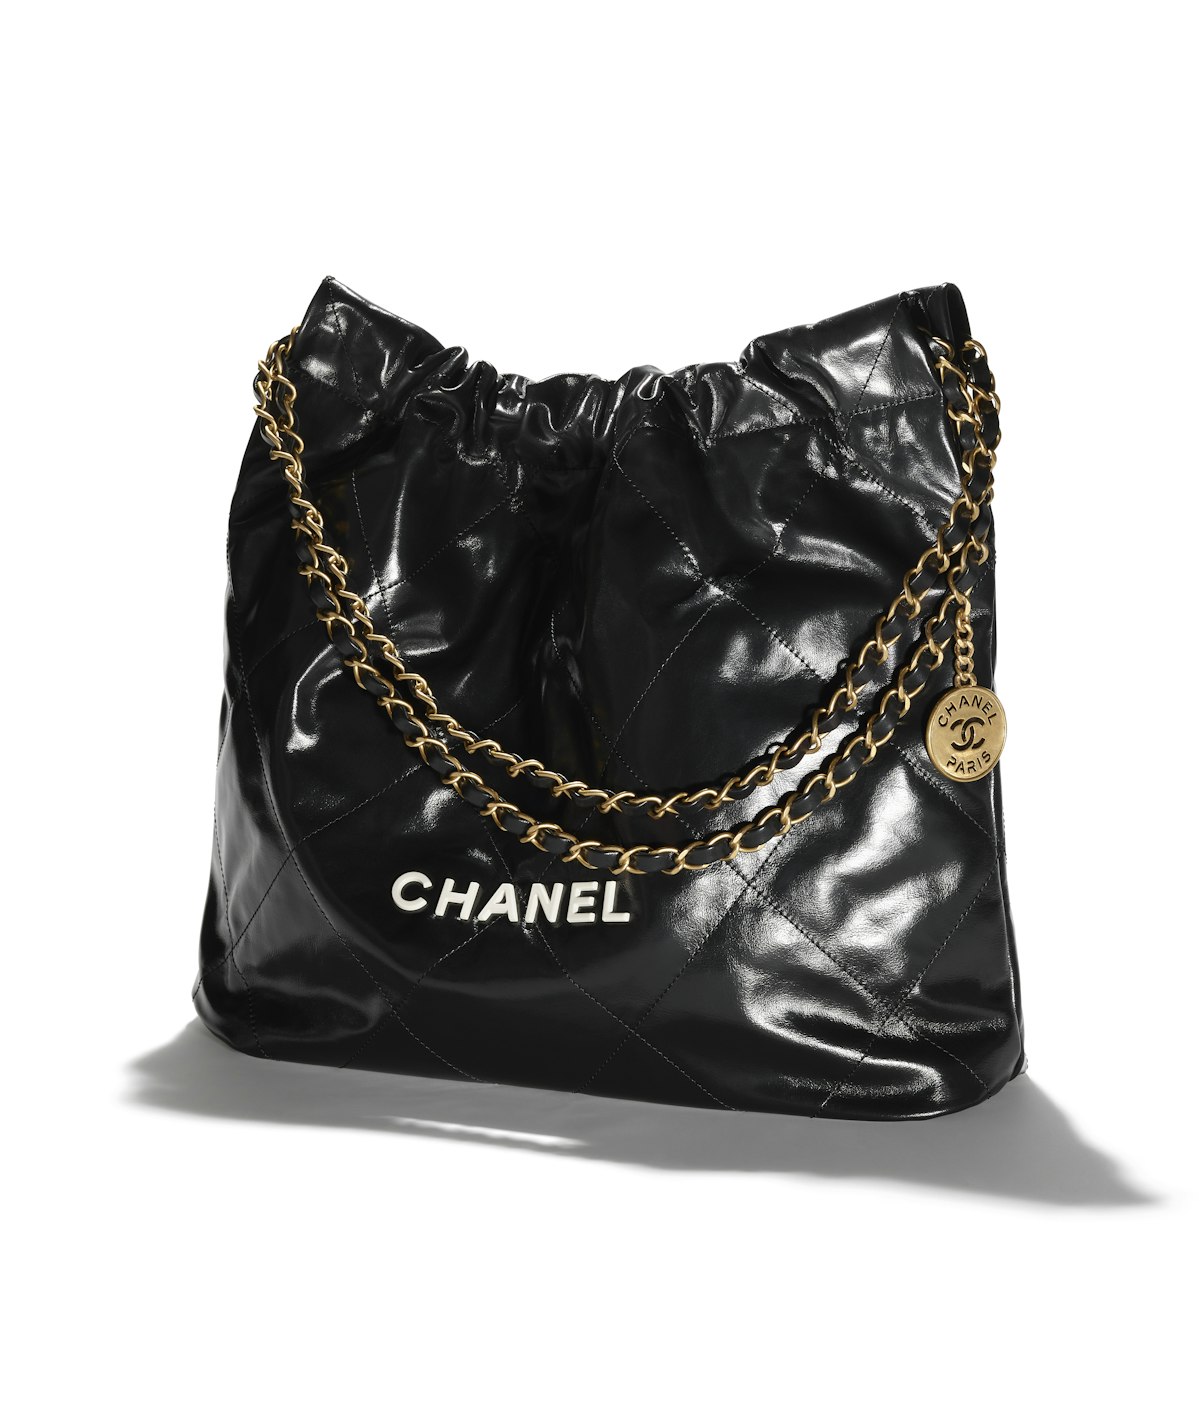 Shop CHANEL CHANEL 22 2022 SS Casual Style Chain Leather Elegant Style Logo  Totes (AS3262 B08037 94305) by sunnyfunny